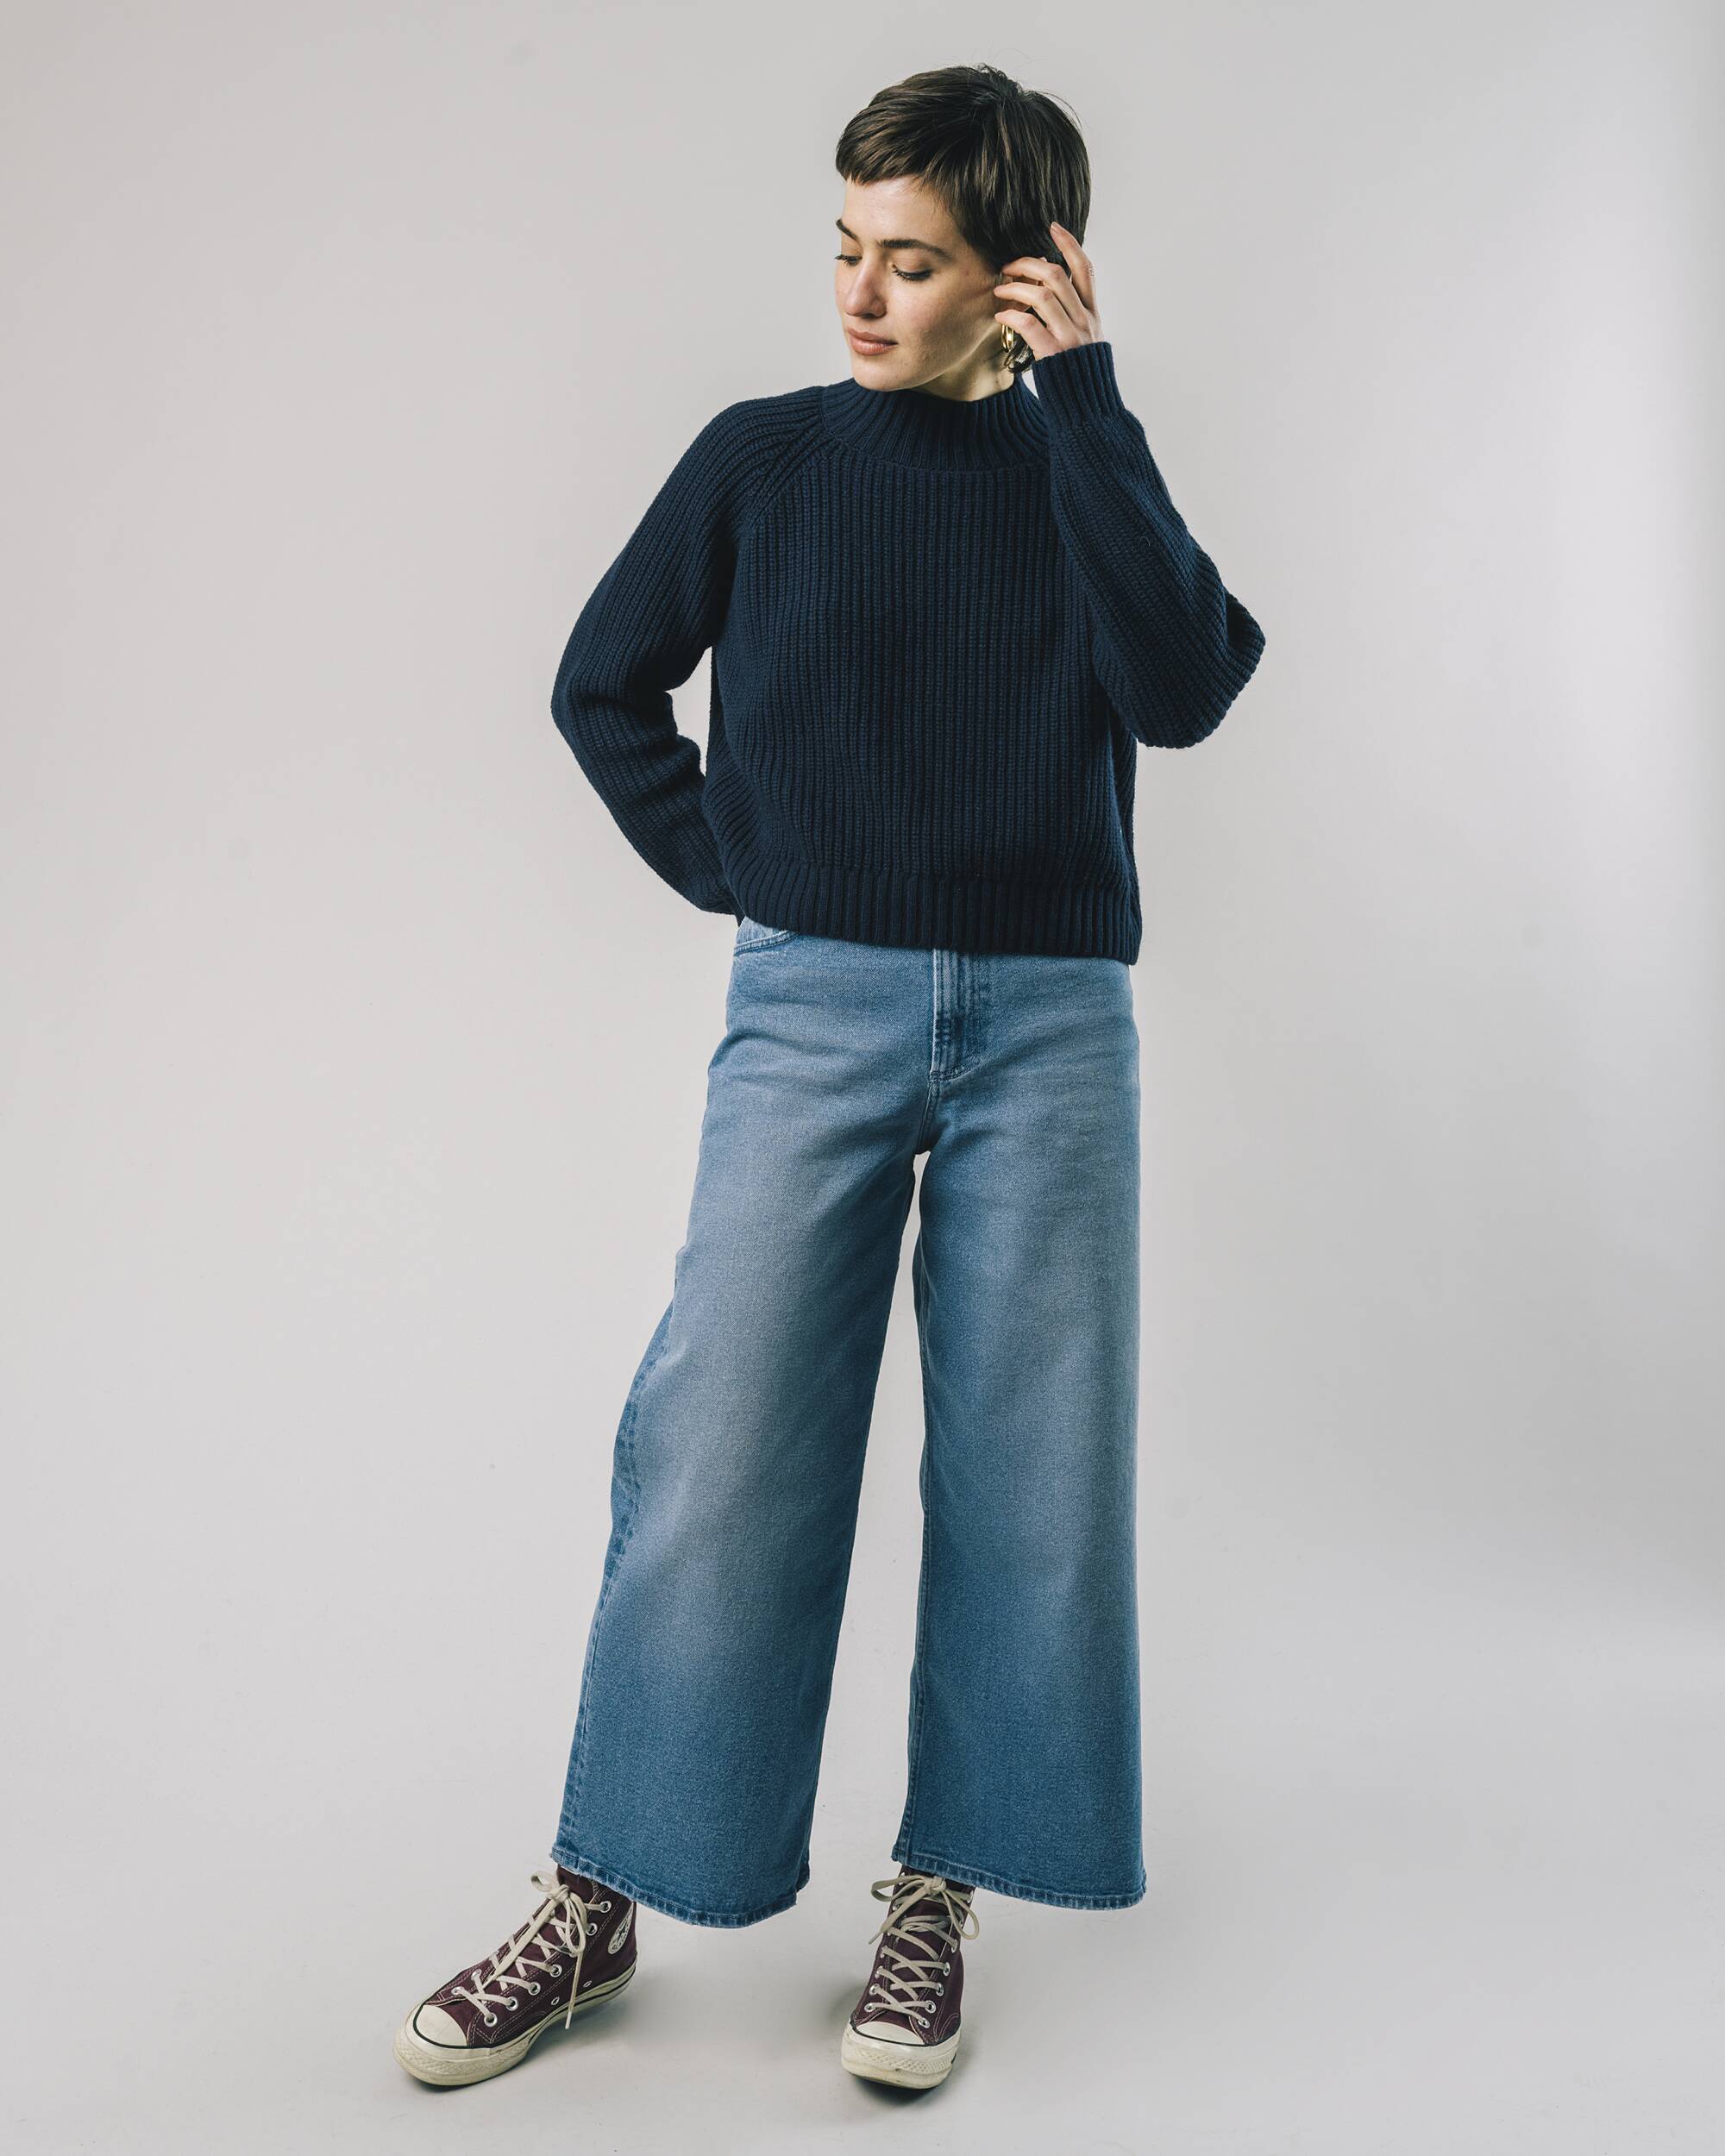 Short-cut sweater "Peony" in navy - blue with a high collar made of recycled cashmere and recycled wool from Brava Fabrics